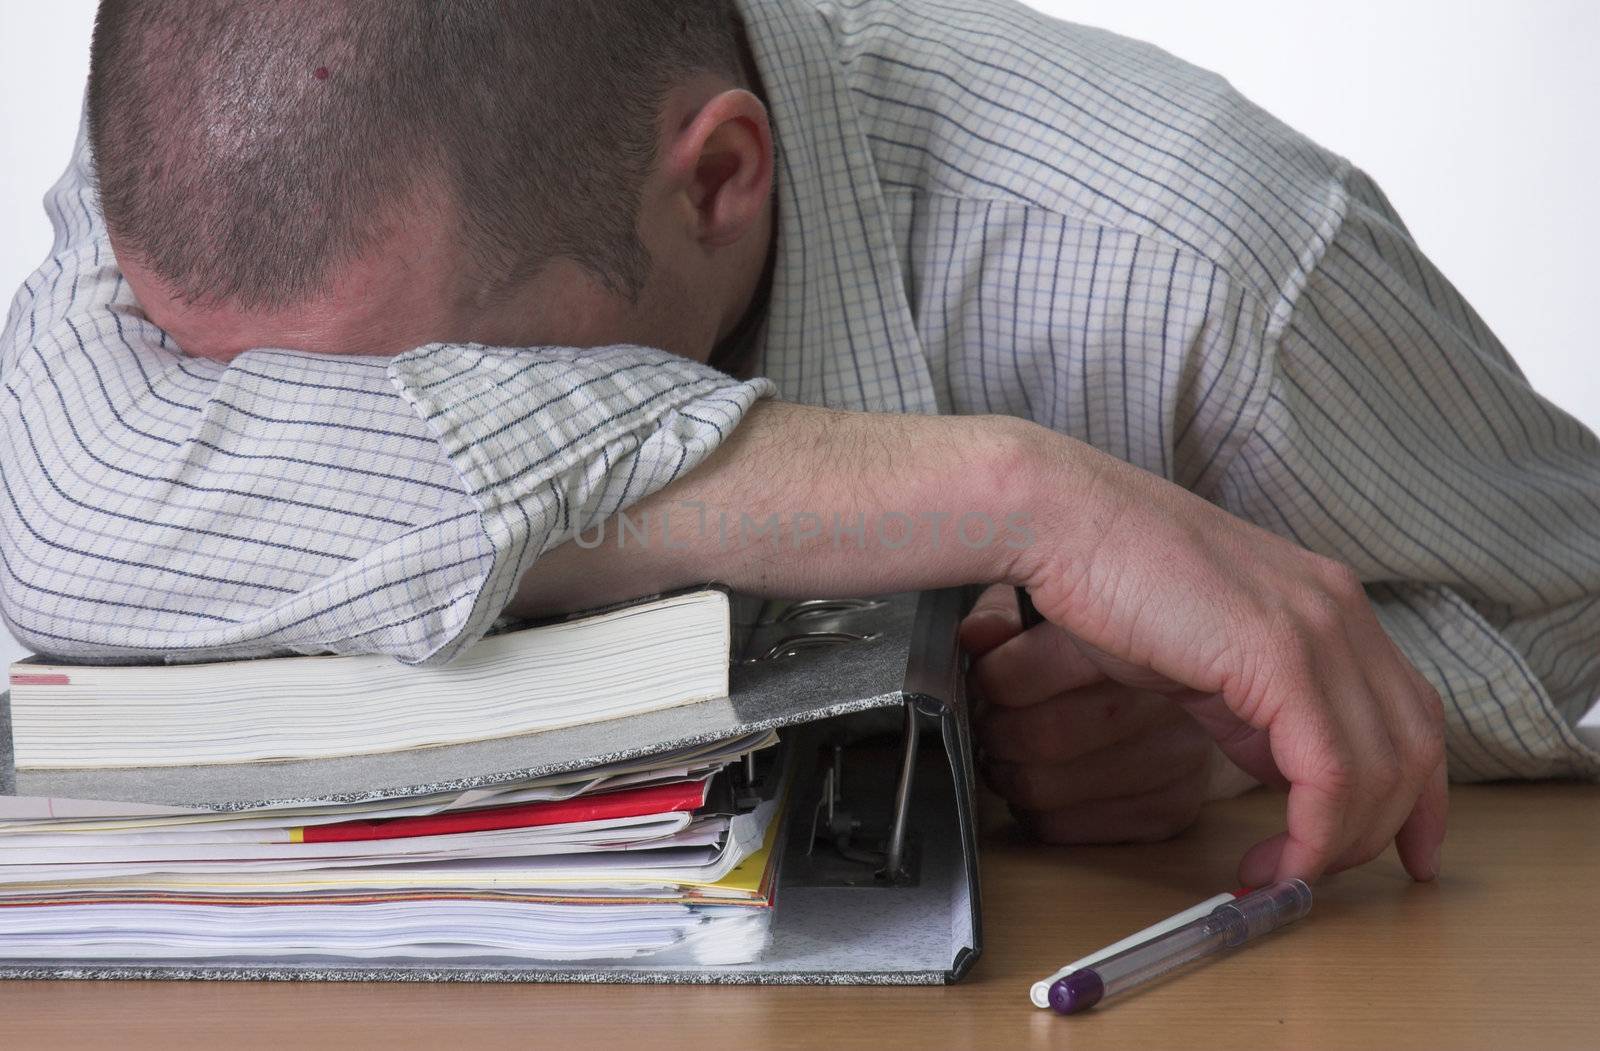 Male student slumped over his work after cramming for exams.